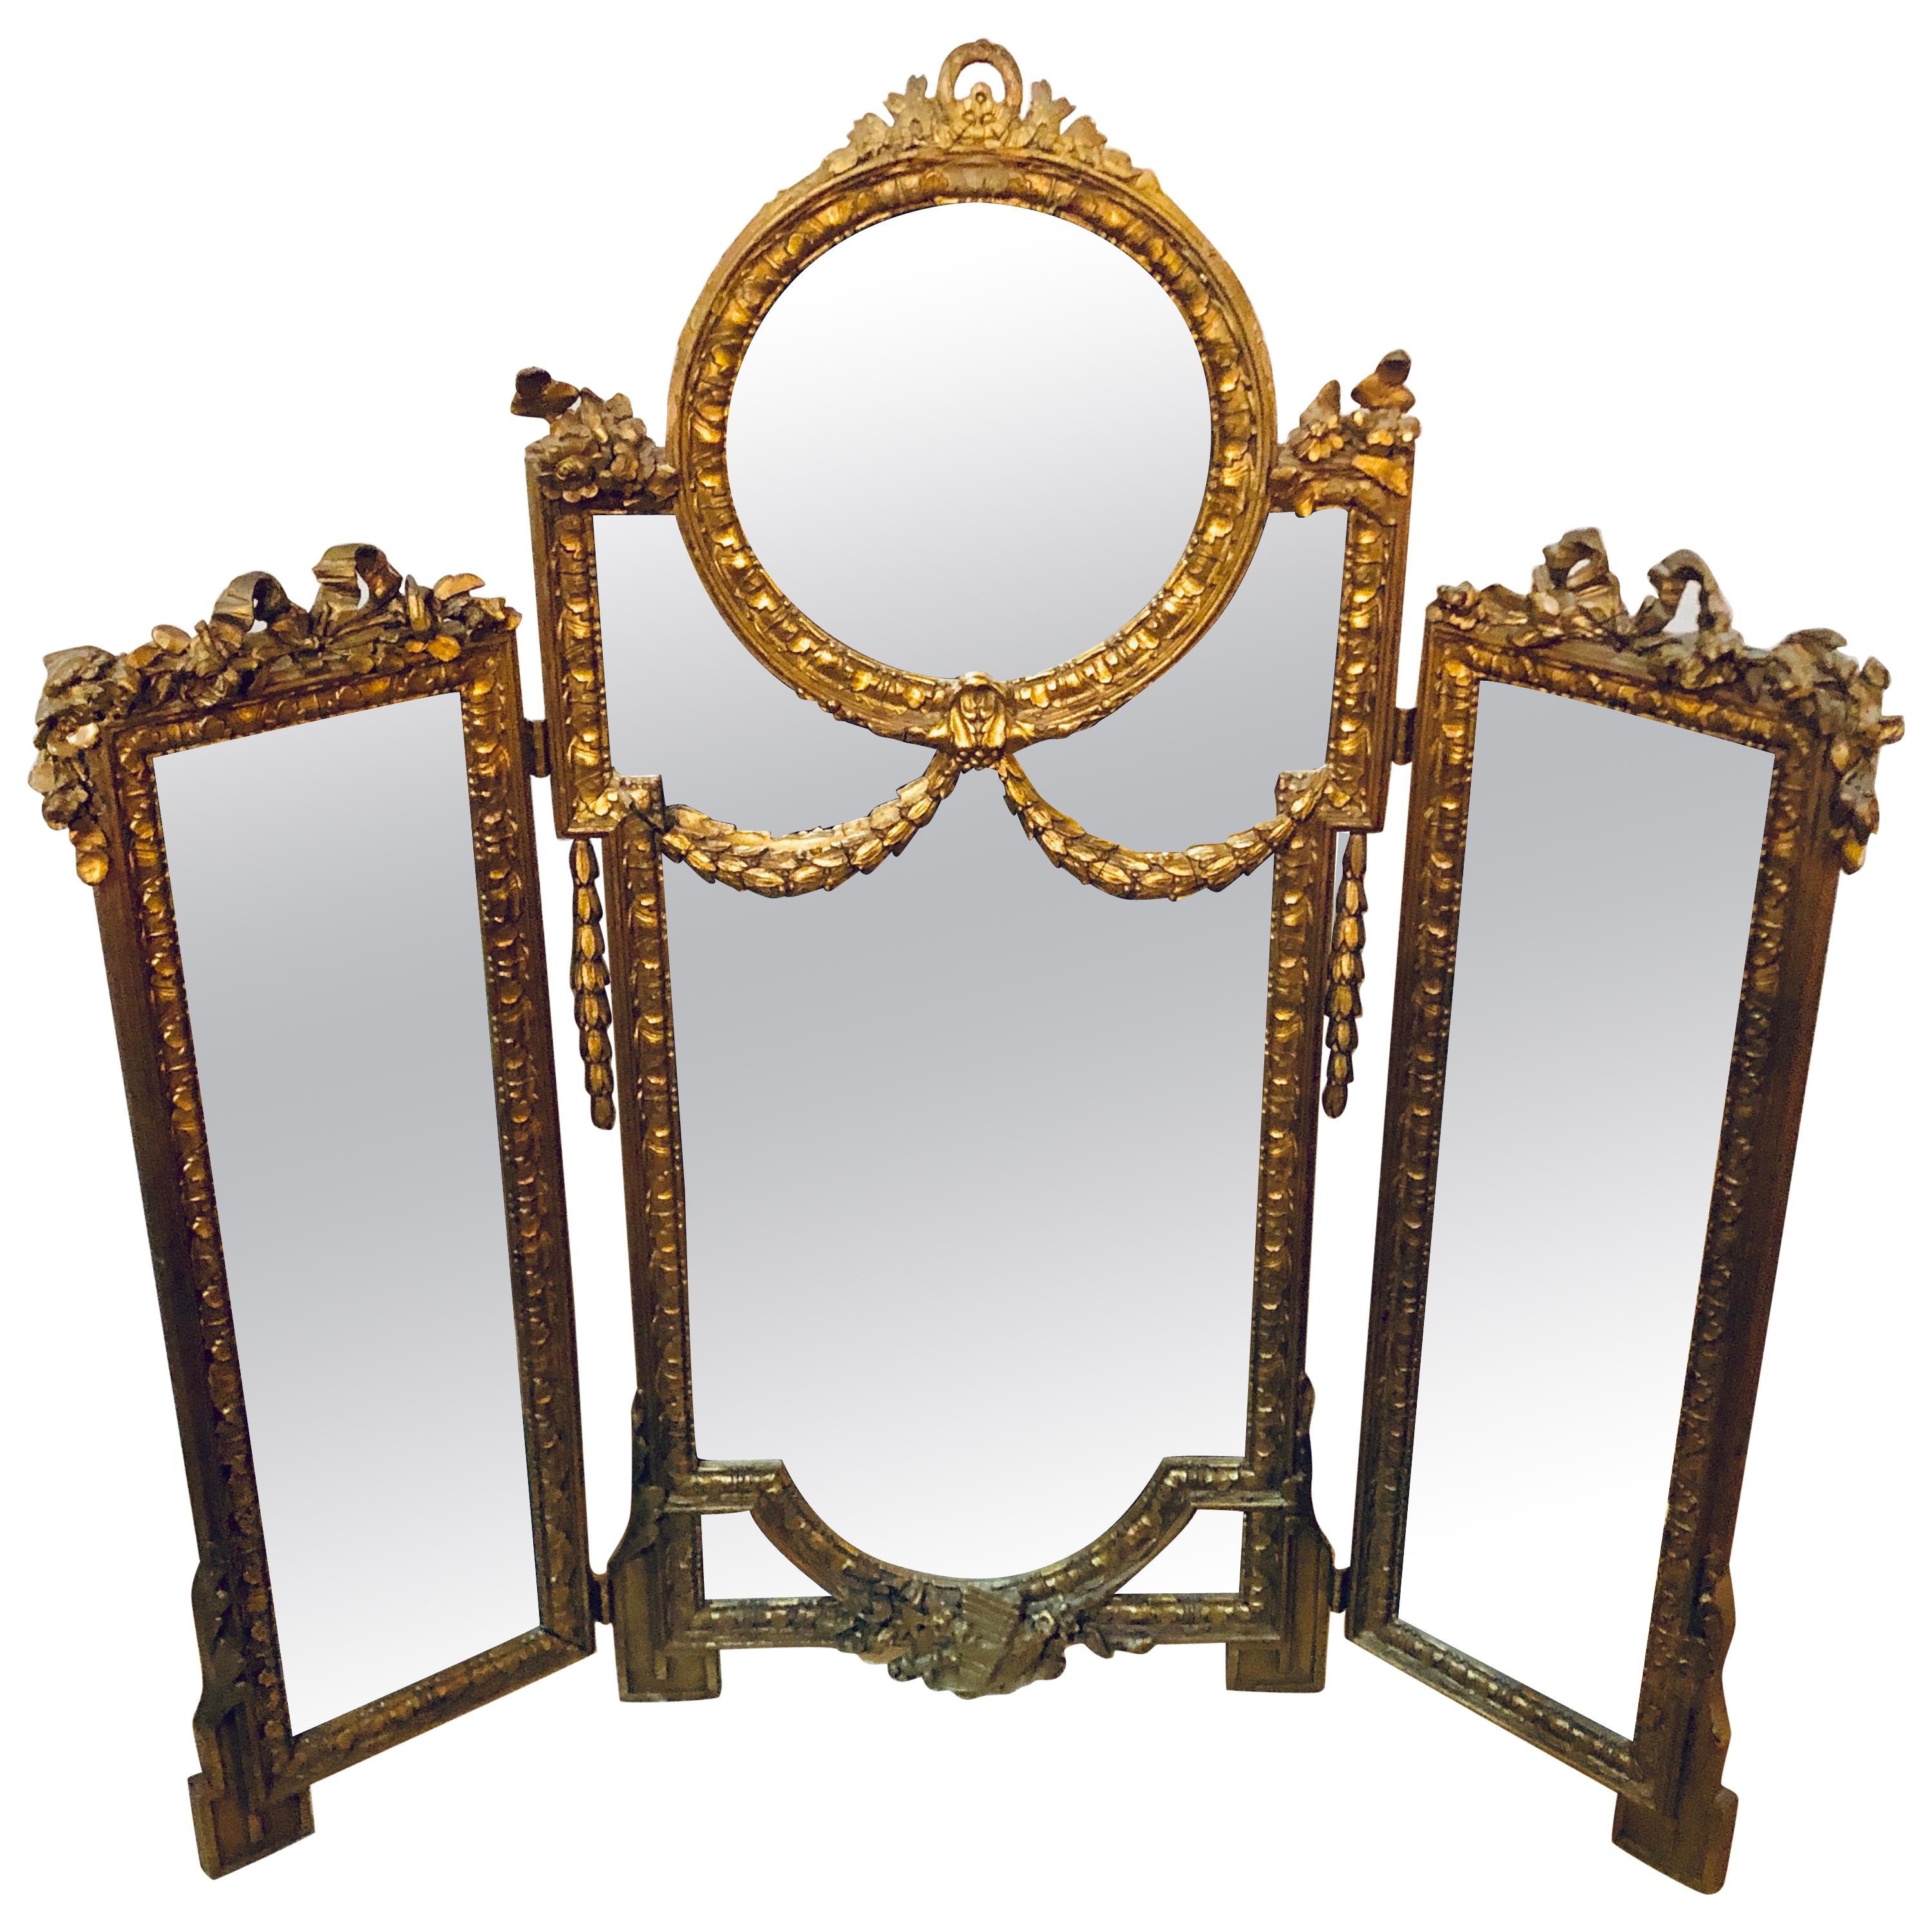 Hollywood Regency 1940s Louis XVI Style Gilt wood Trifold Vanity or Table Mirror